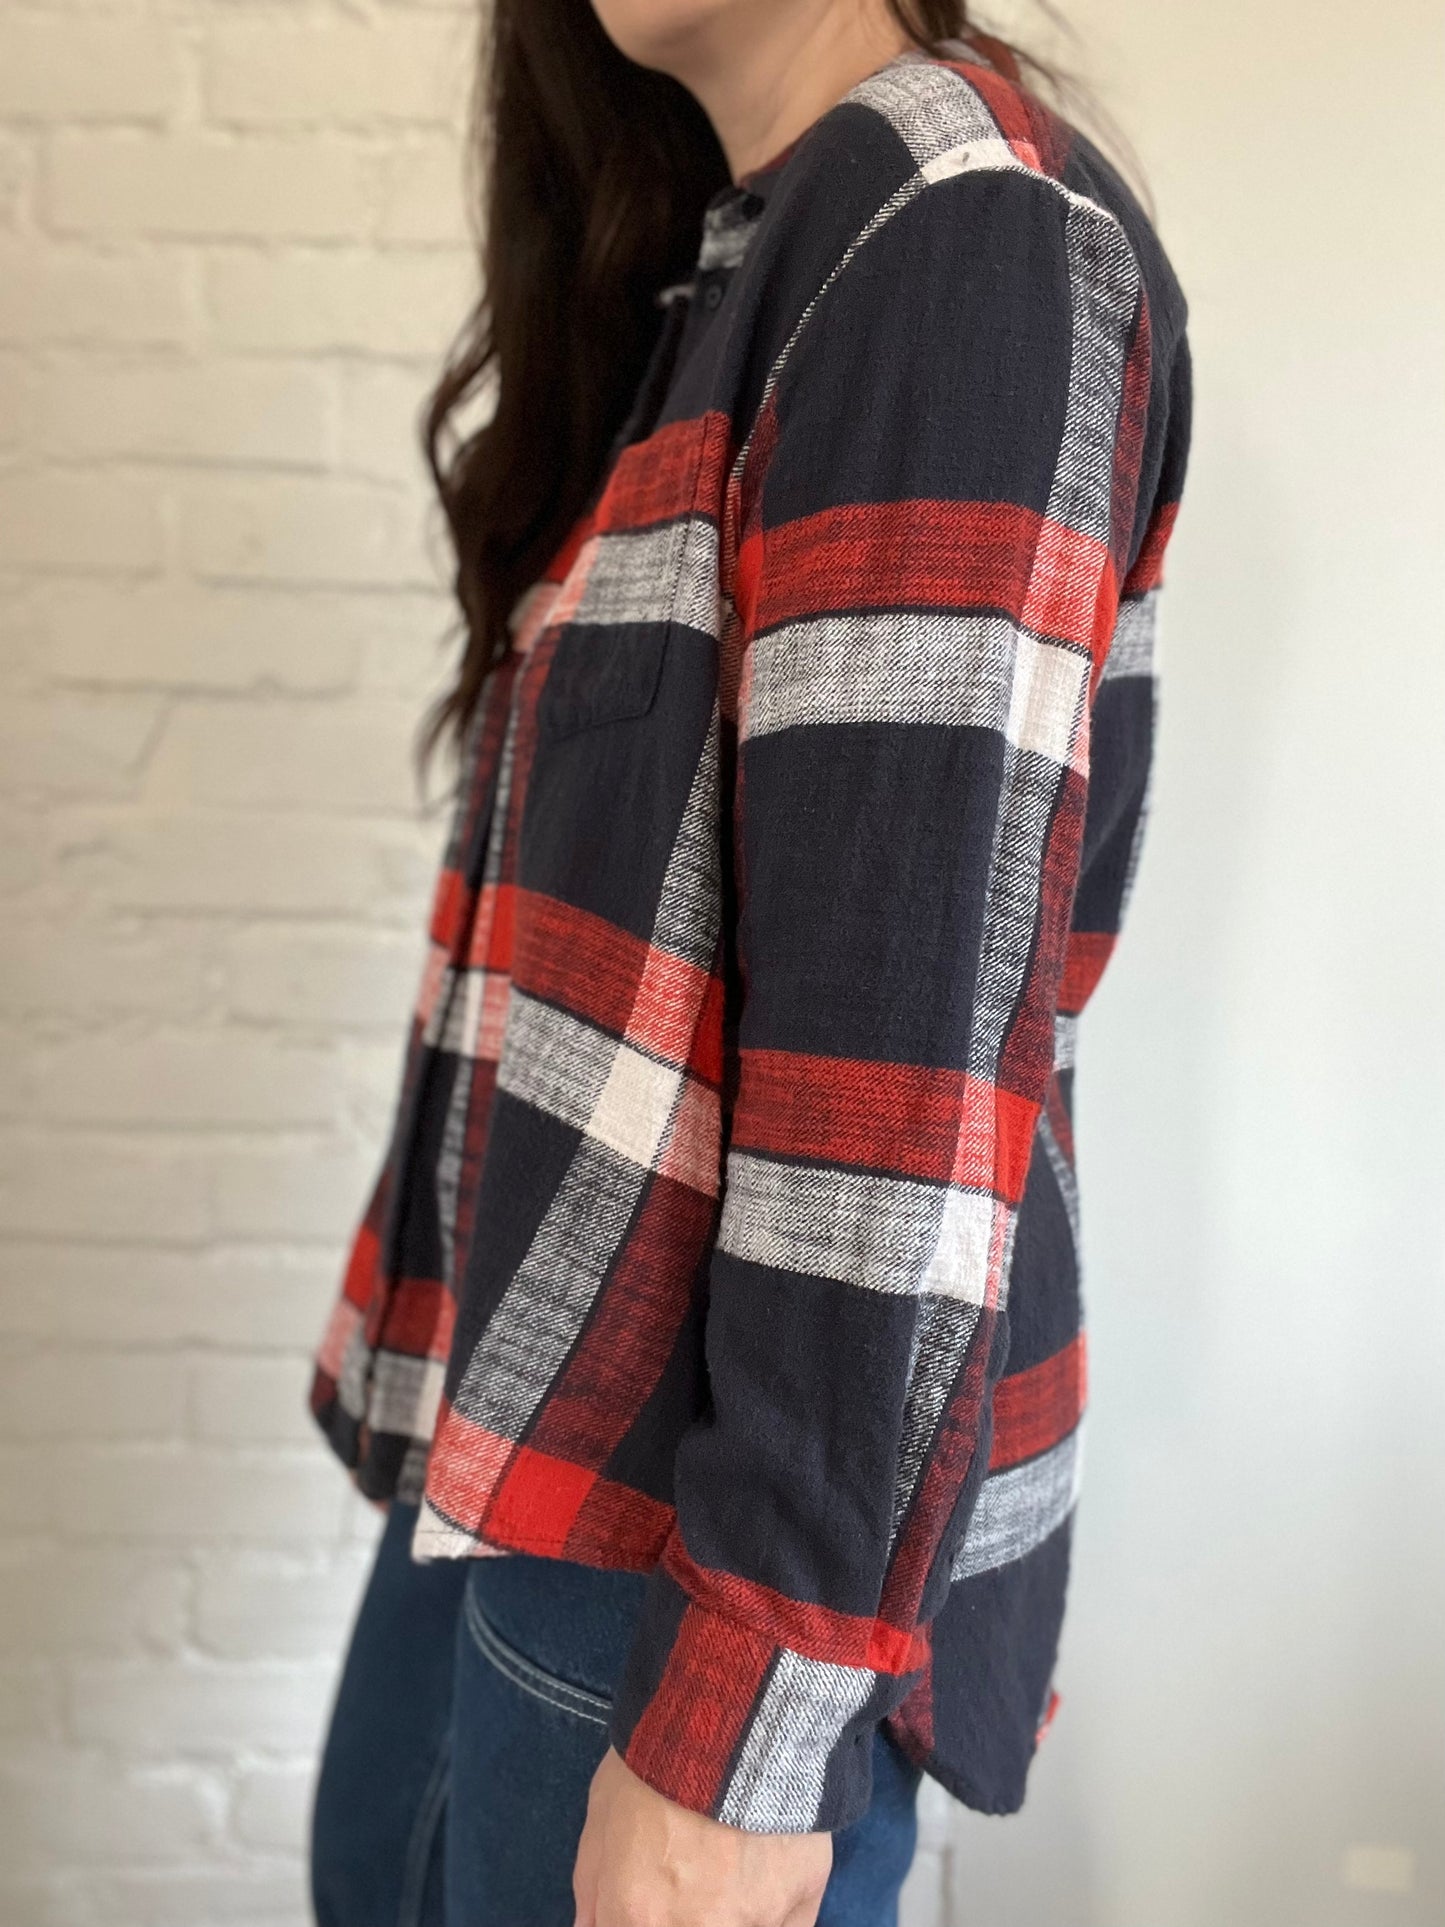 Madewell Plaid Button-Up - Size L